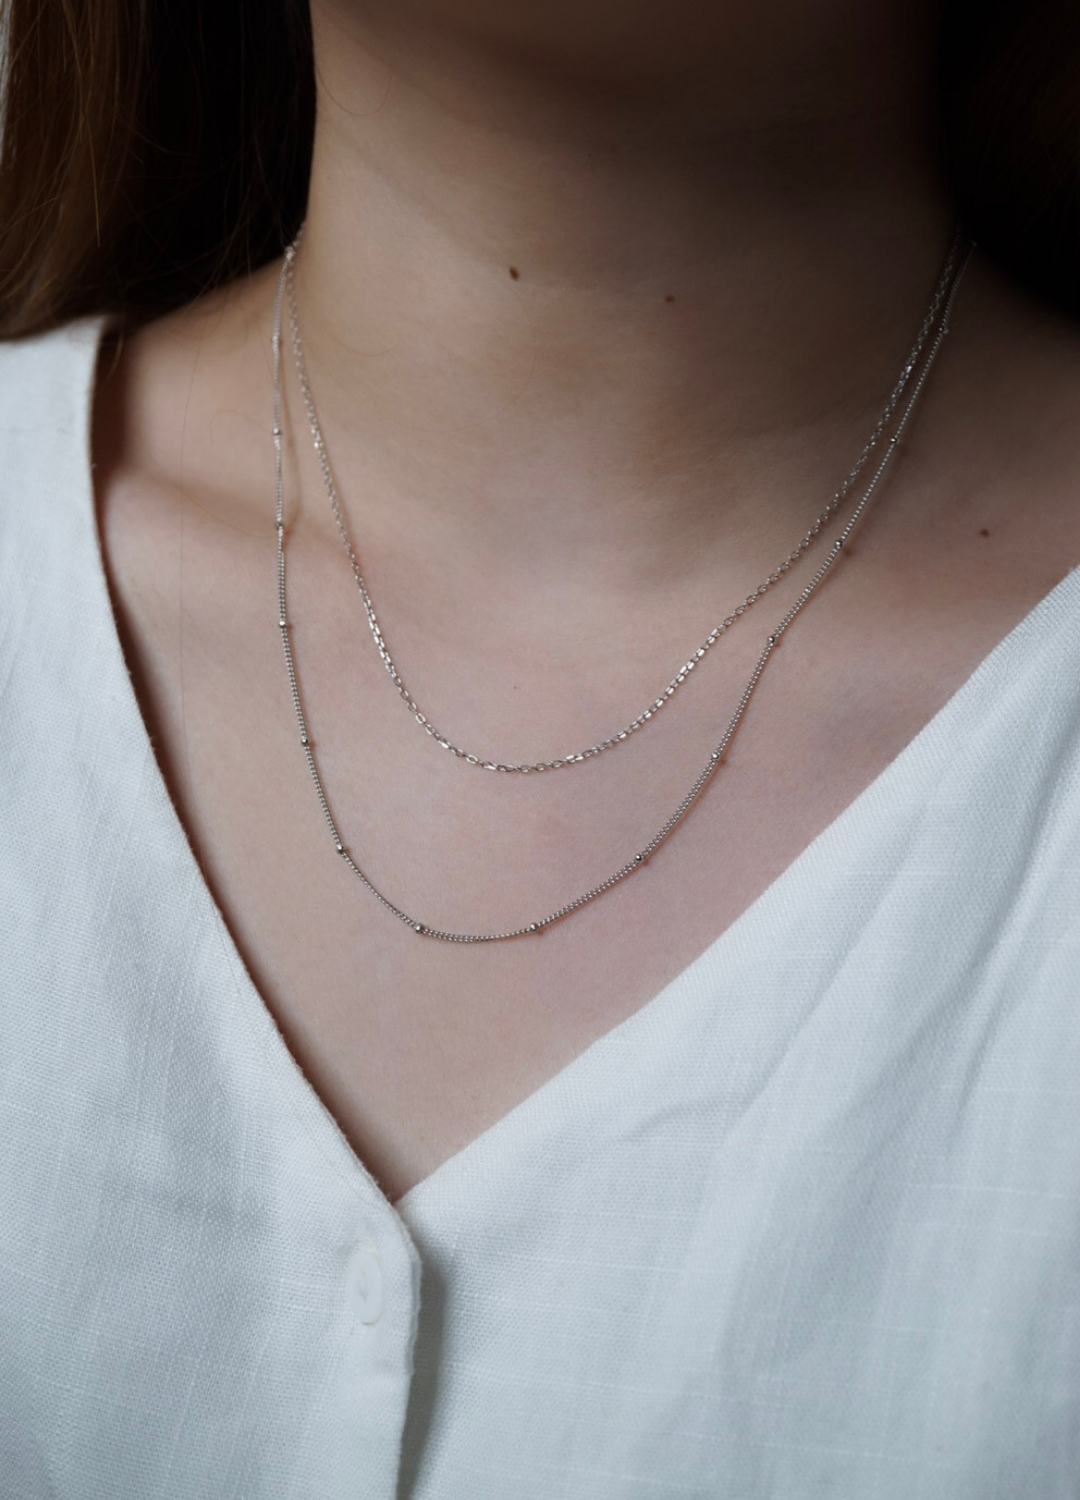 Sterling Silver Necklace Chains